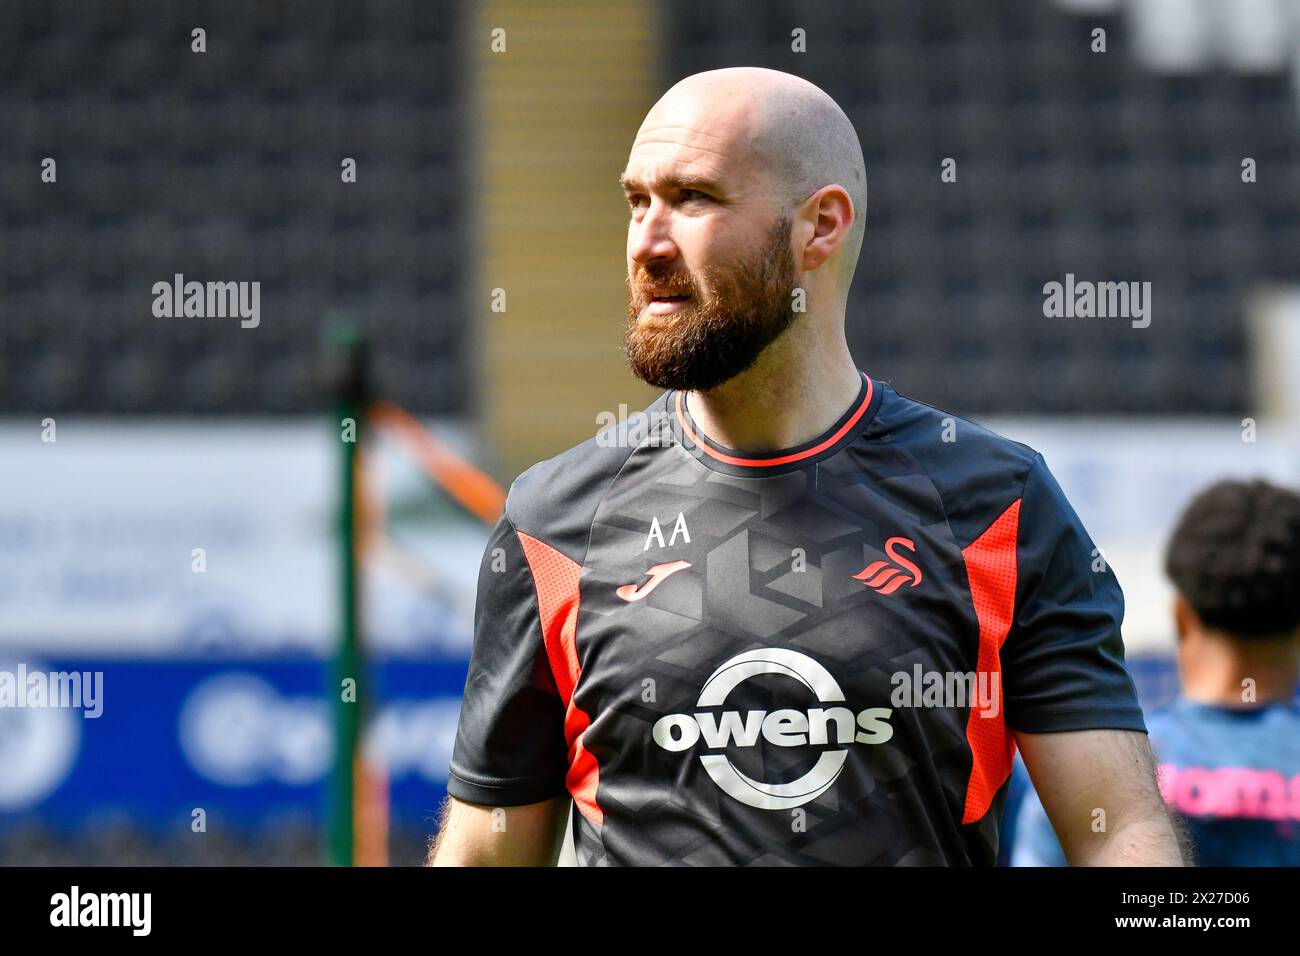 Swansea, Wales. 20 April 2024. Alun Andrews Swansea City Academy Physical Development Coach during the pre-match warm-up before the Under 21 Professional Development League match between Swansea City and Bristol City at the Swansea.com Stadium in Swansea, Wales, UK on 20 April 2024. Credit: Duncan Thomas/Majestic Media/Alamy Live News. Stock Photo